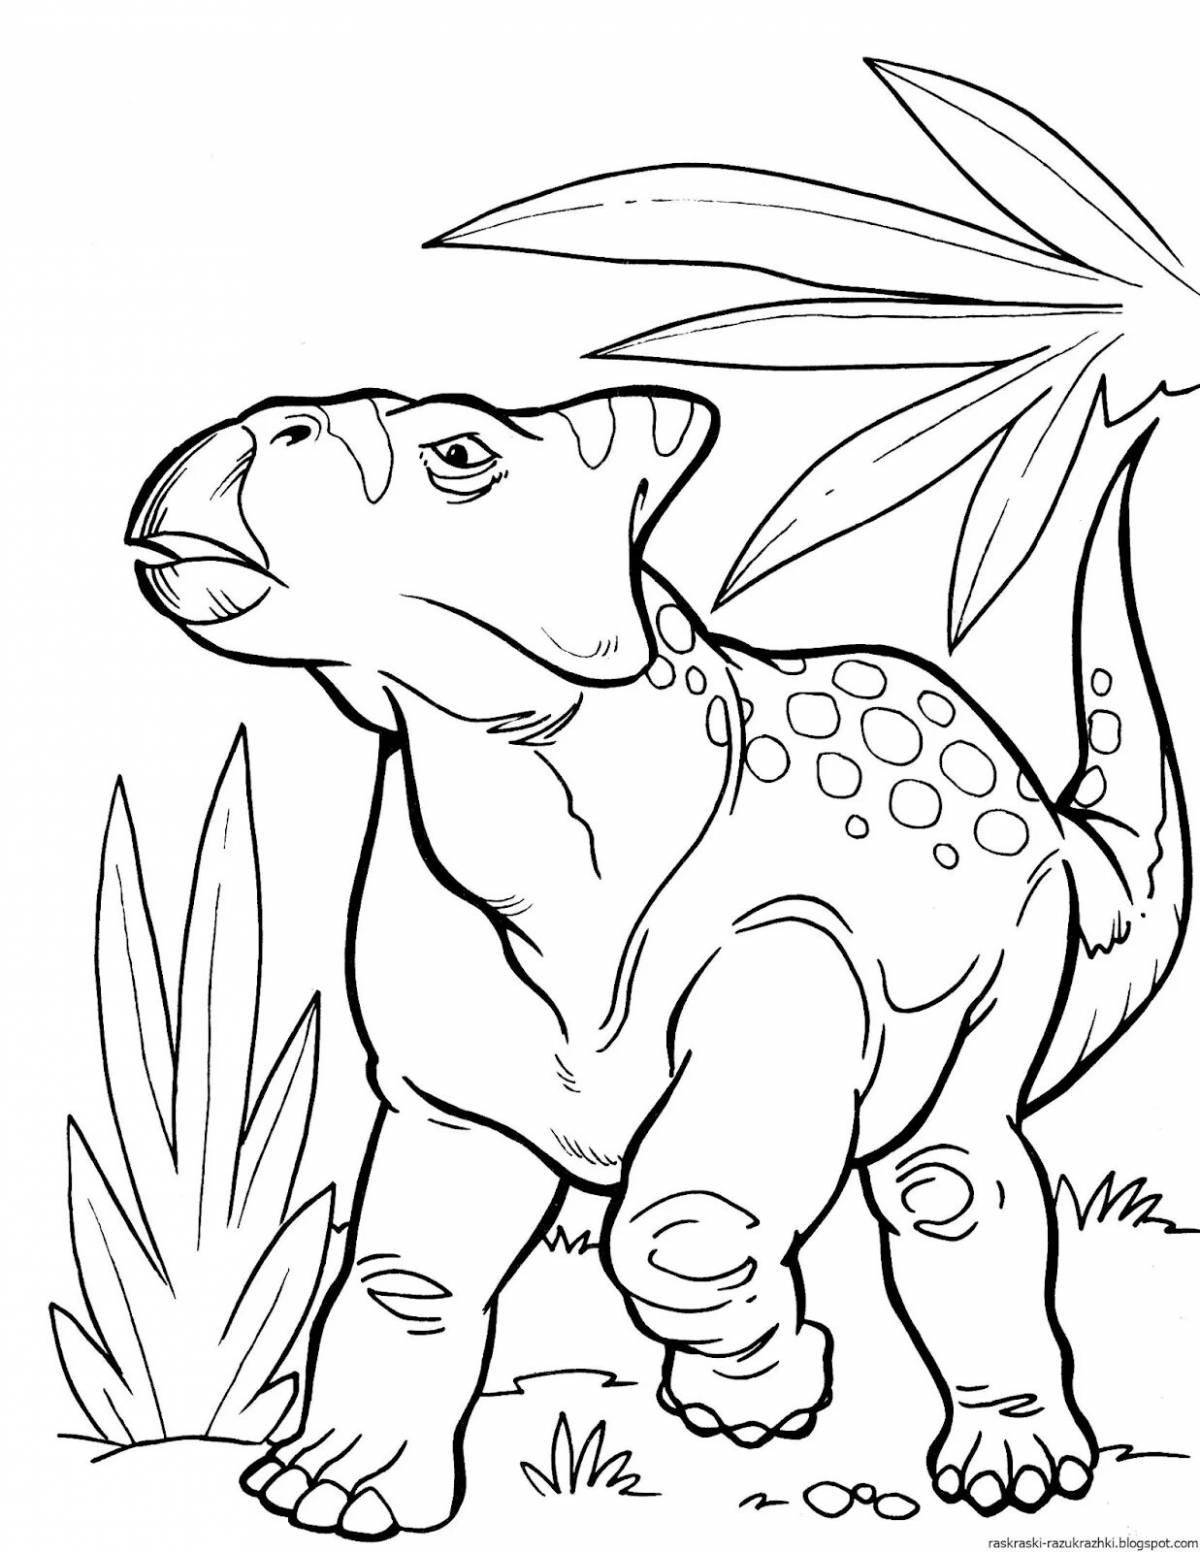 Tempting coloring pages dinosaurs